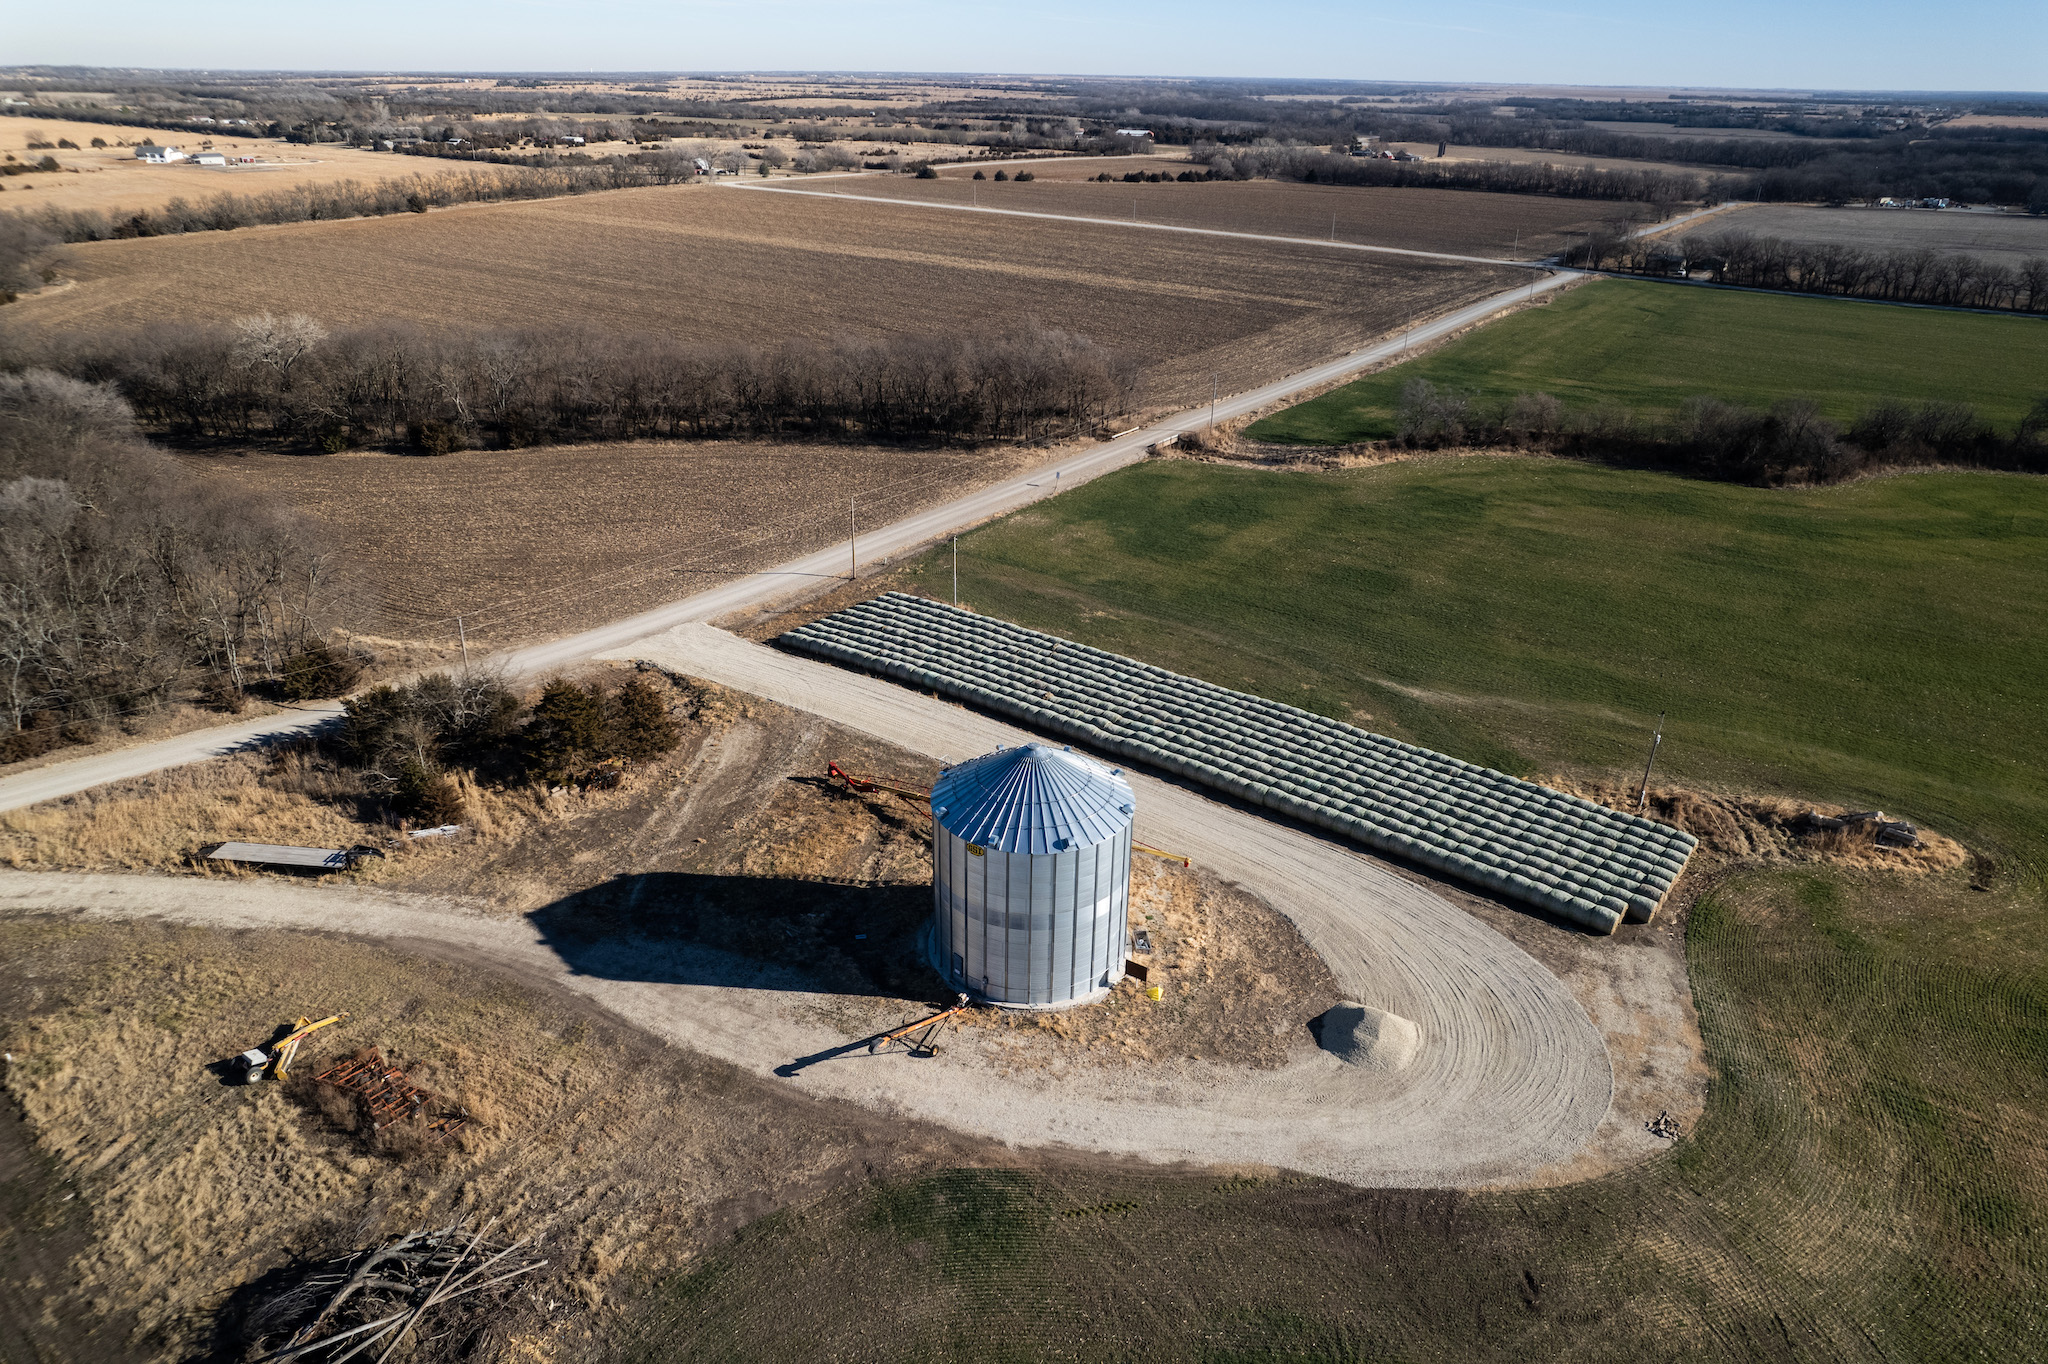 Corn silo in Kansas. Charm Industrial sources biomass such as corn stalks which it turns into bio-oil for storing carbon. (Courtesy of Charm Industrial)